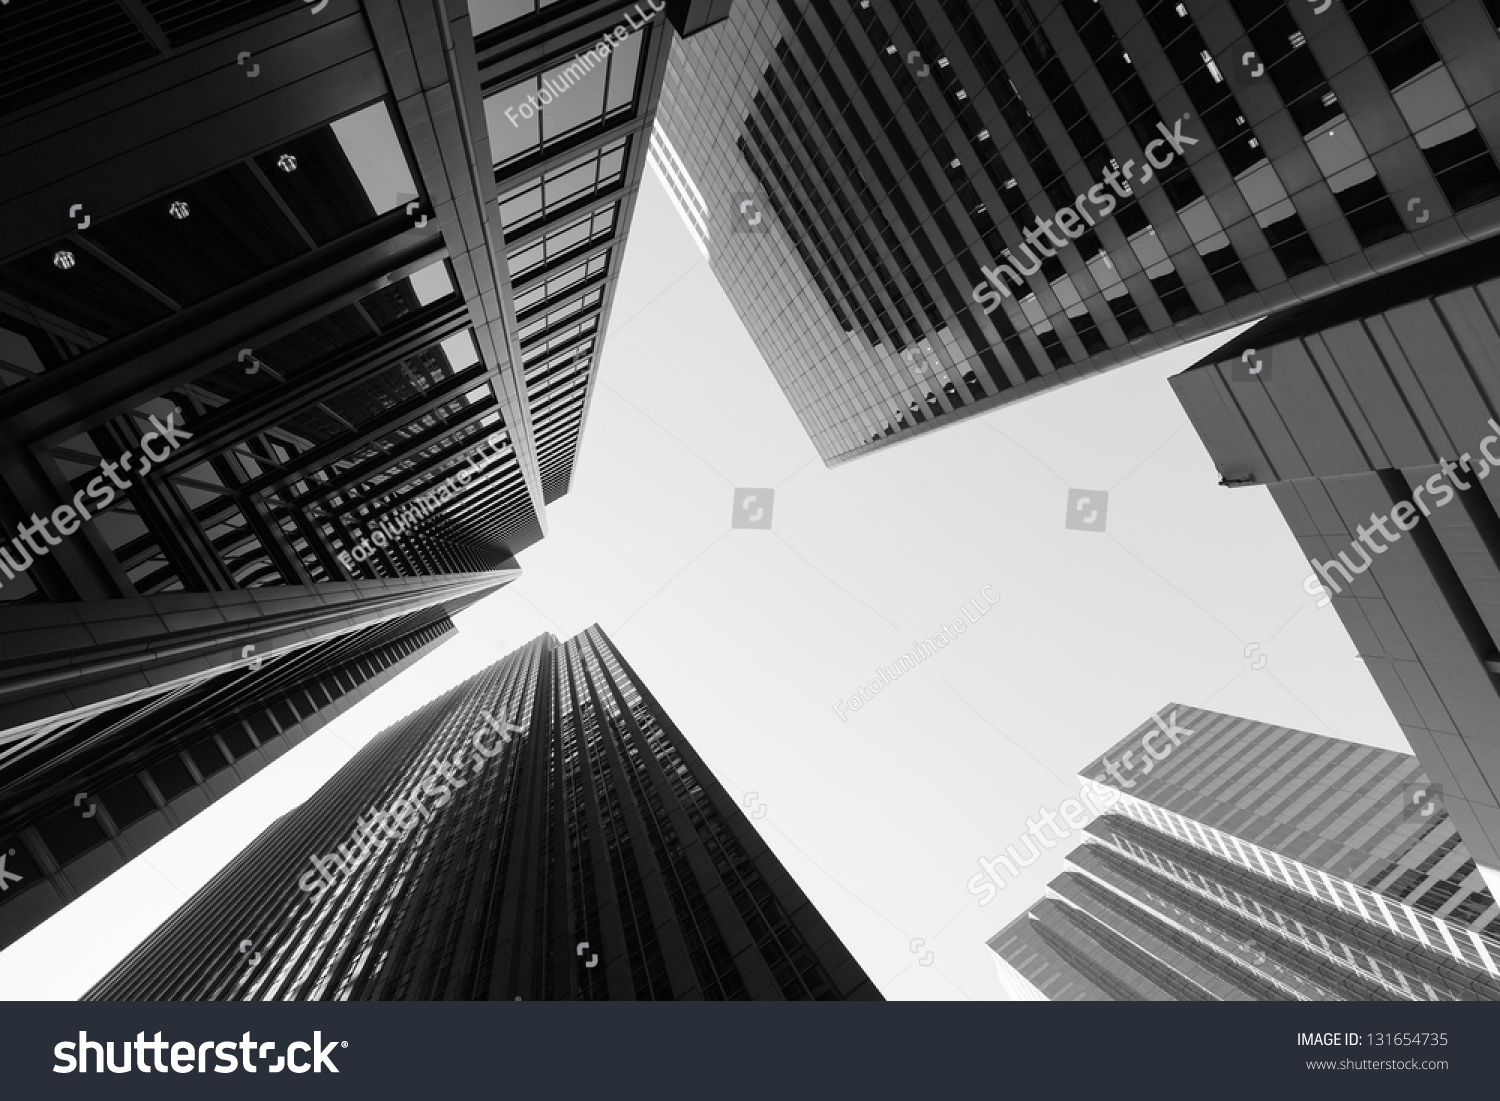 Black and white abstract upward view of downtown skyscrapers. #131654735